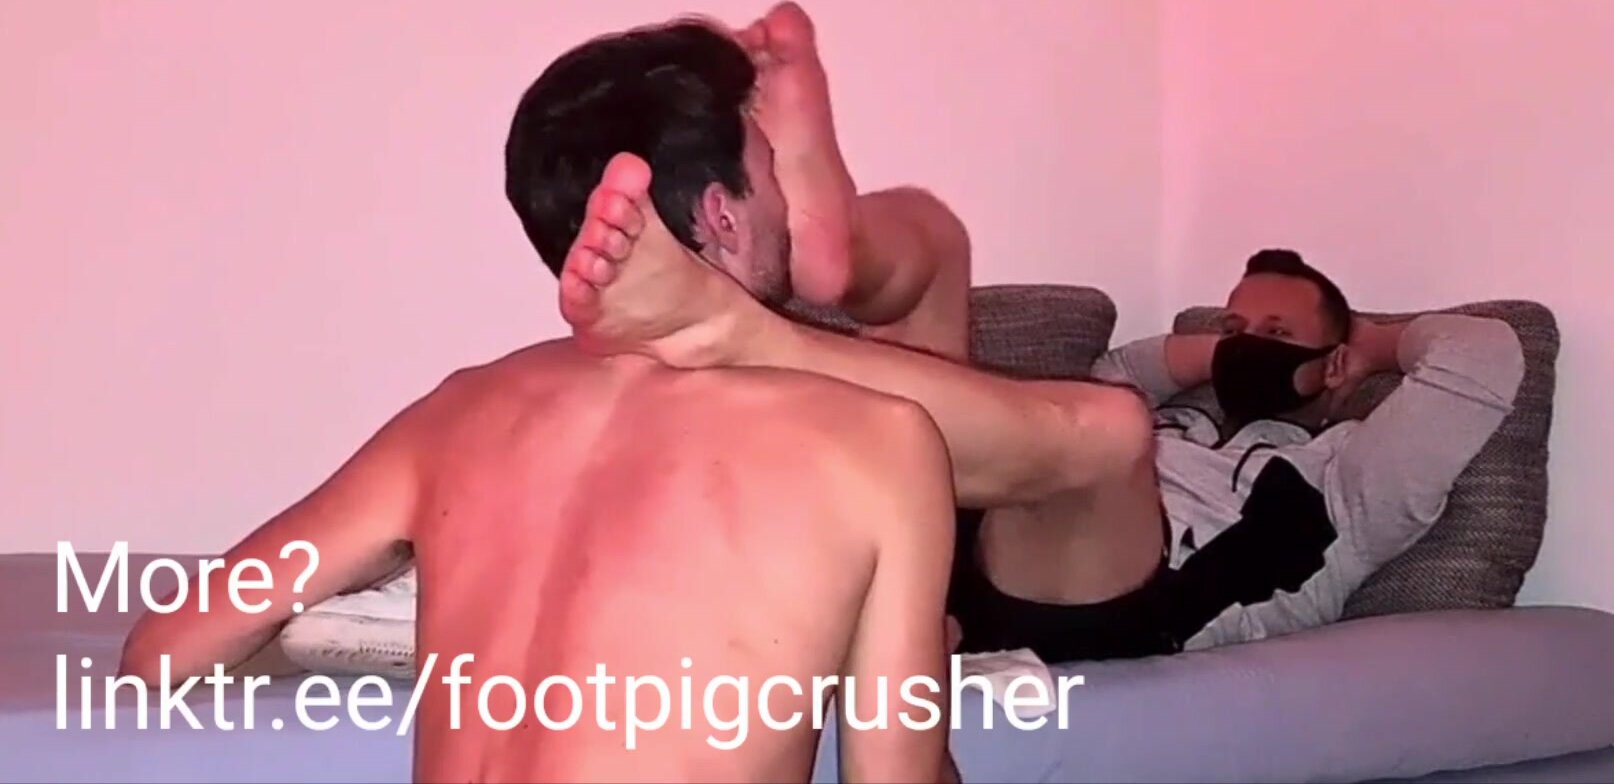 Rubbing my sweaty after gym feet over his face